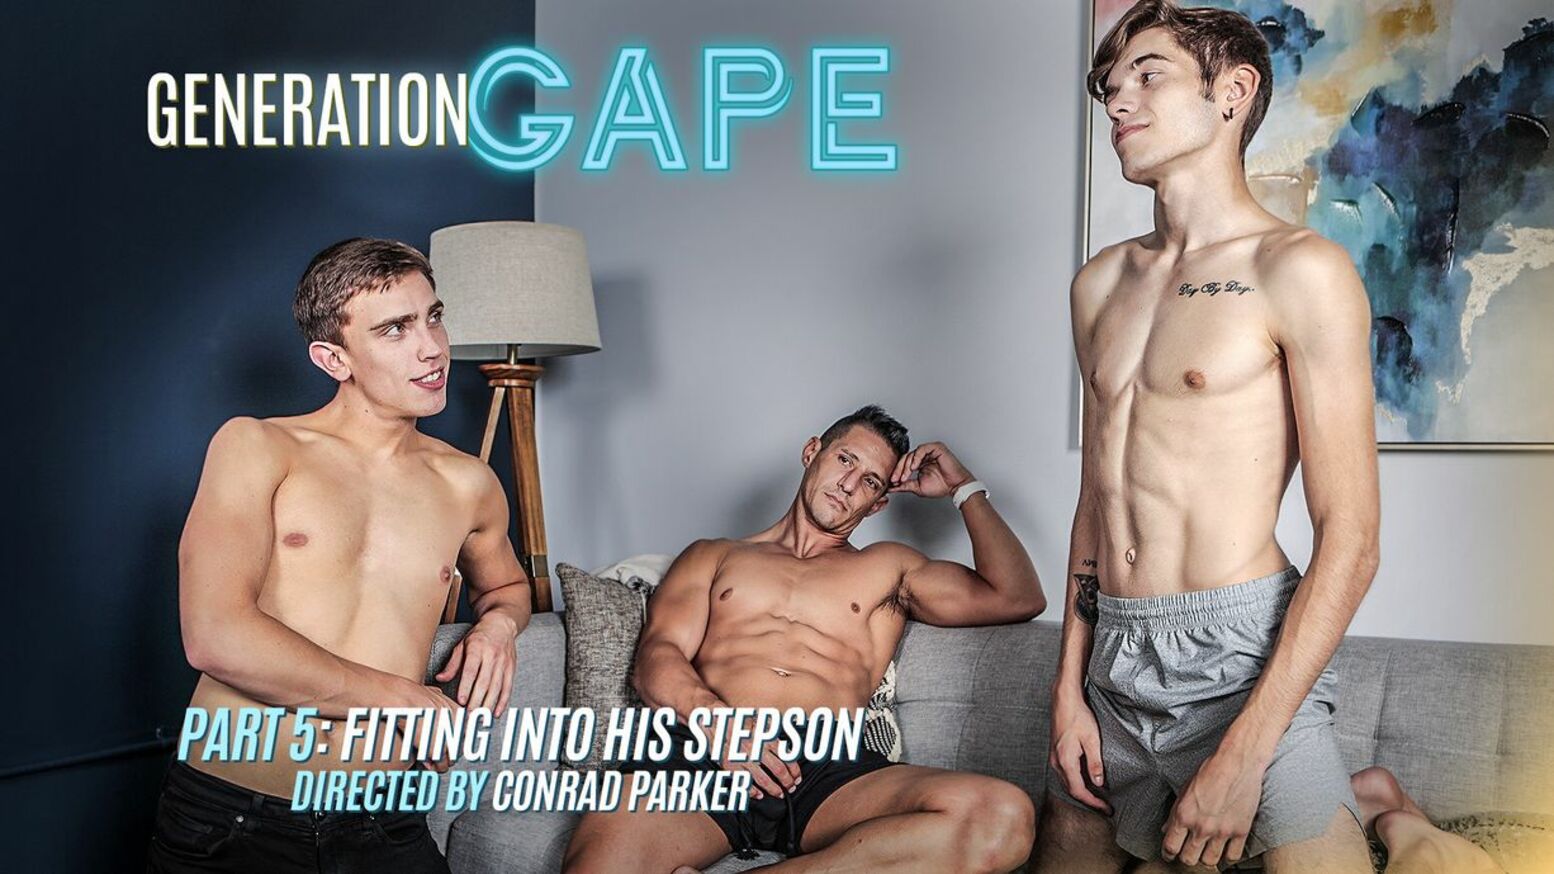 Generation Gape - Part 5: Fitting Into His Stepson